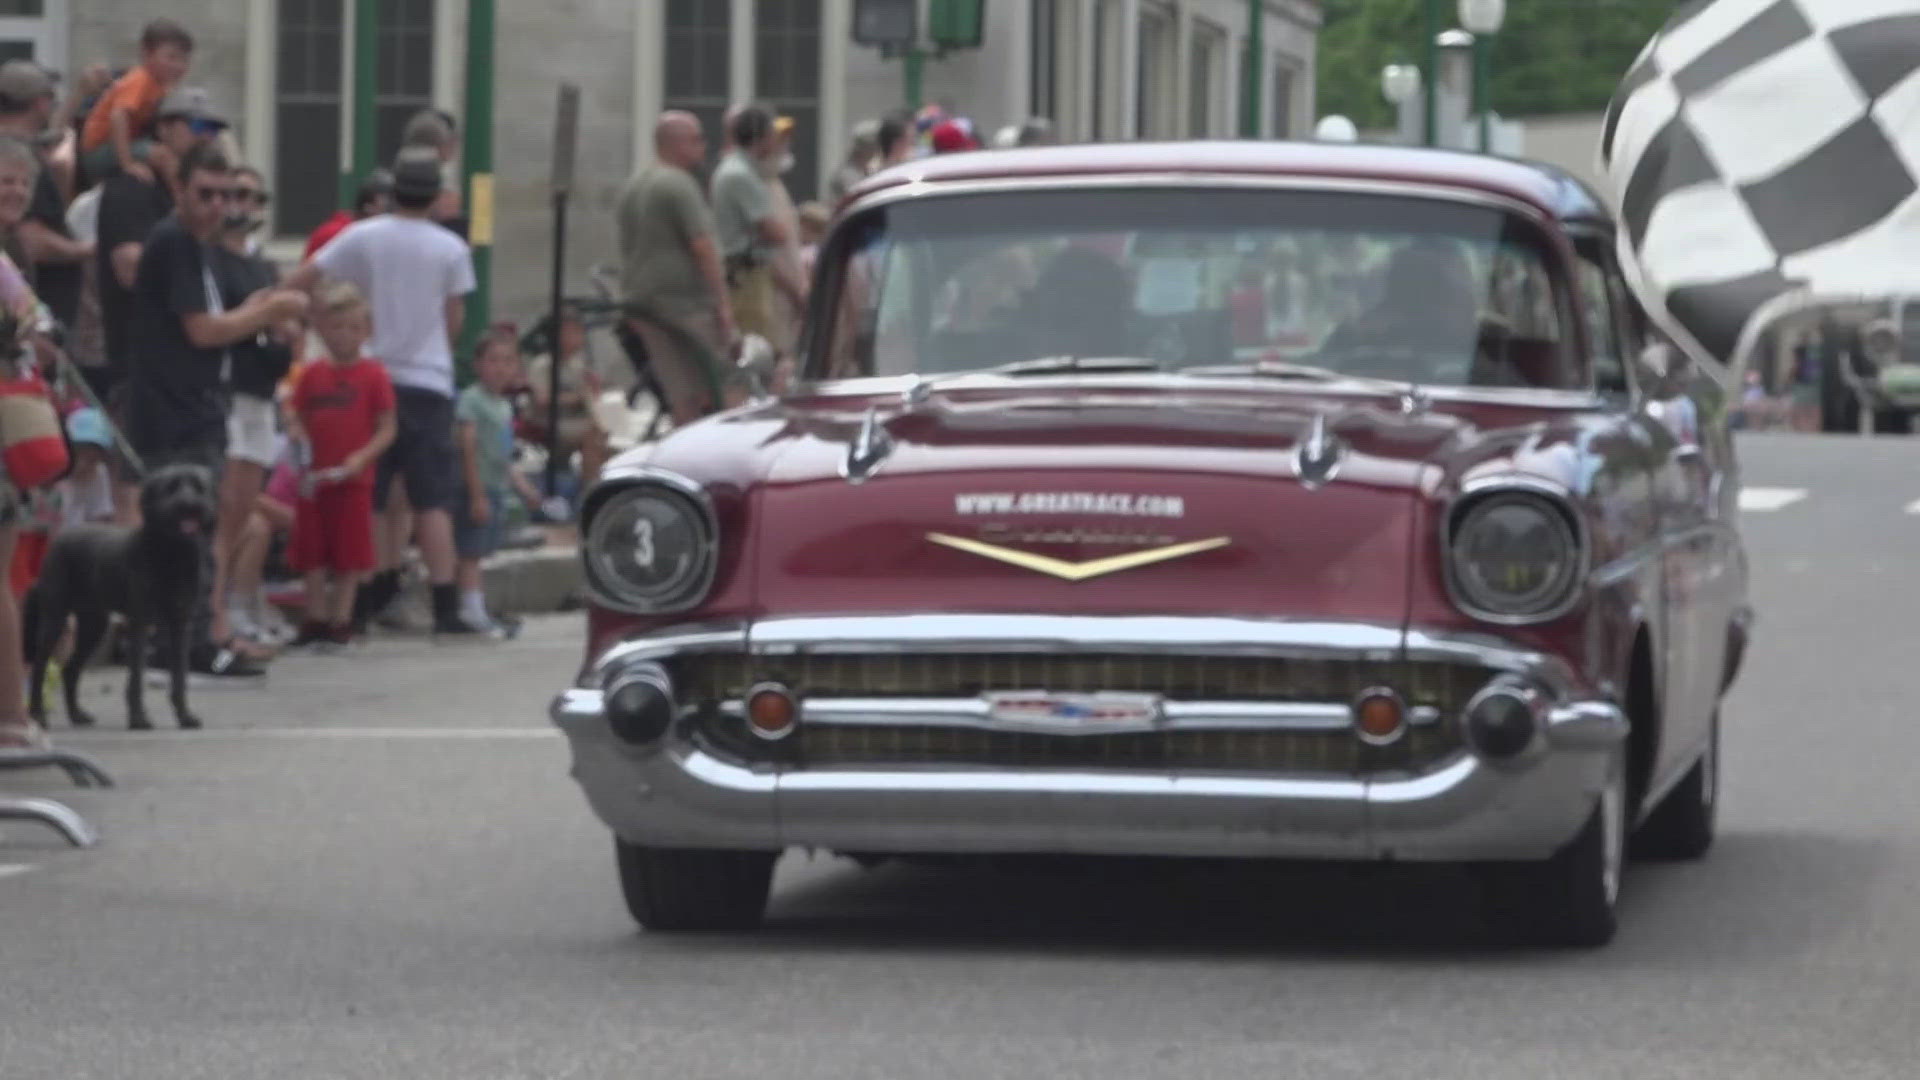 More than 130 classic cars, including 10 from Maine, journeyed 2,300 miles during The Great Race.